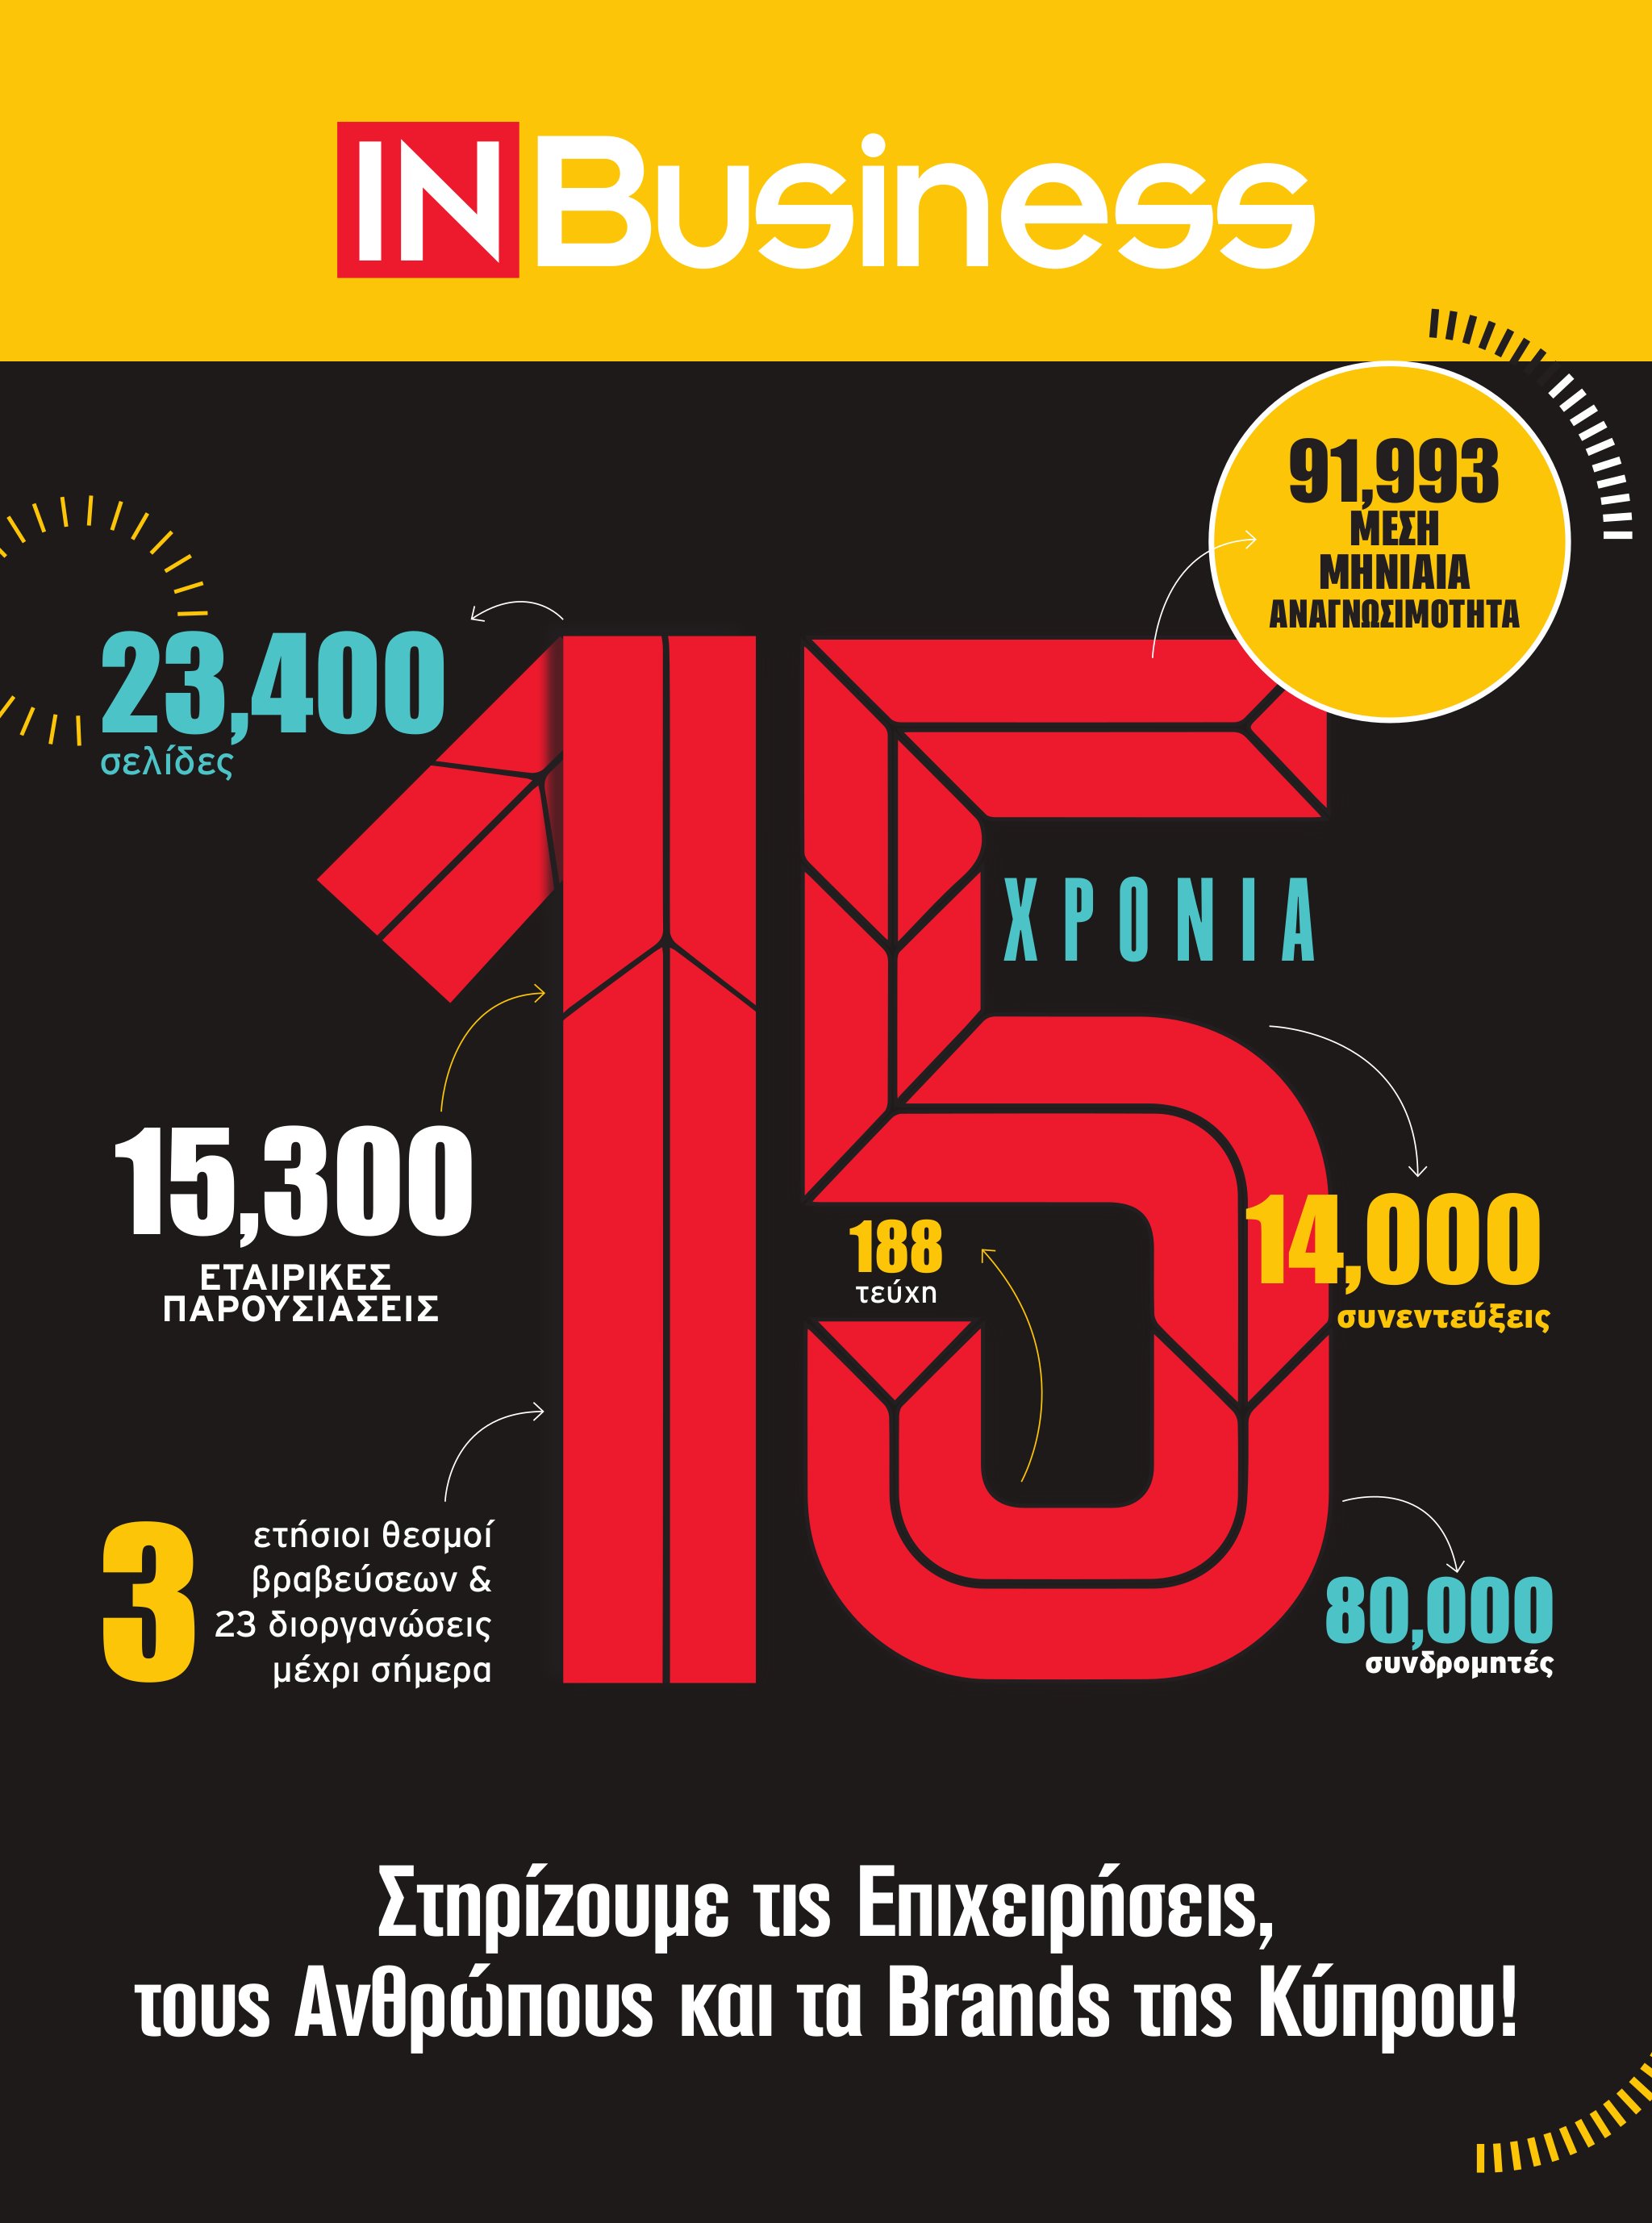 InBusiness 15th anniversary special edition 2021 – Lanitis Group Special Feature